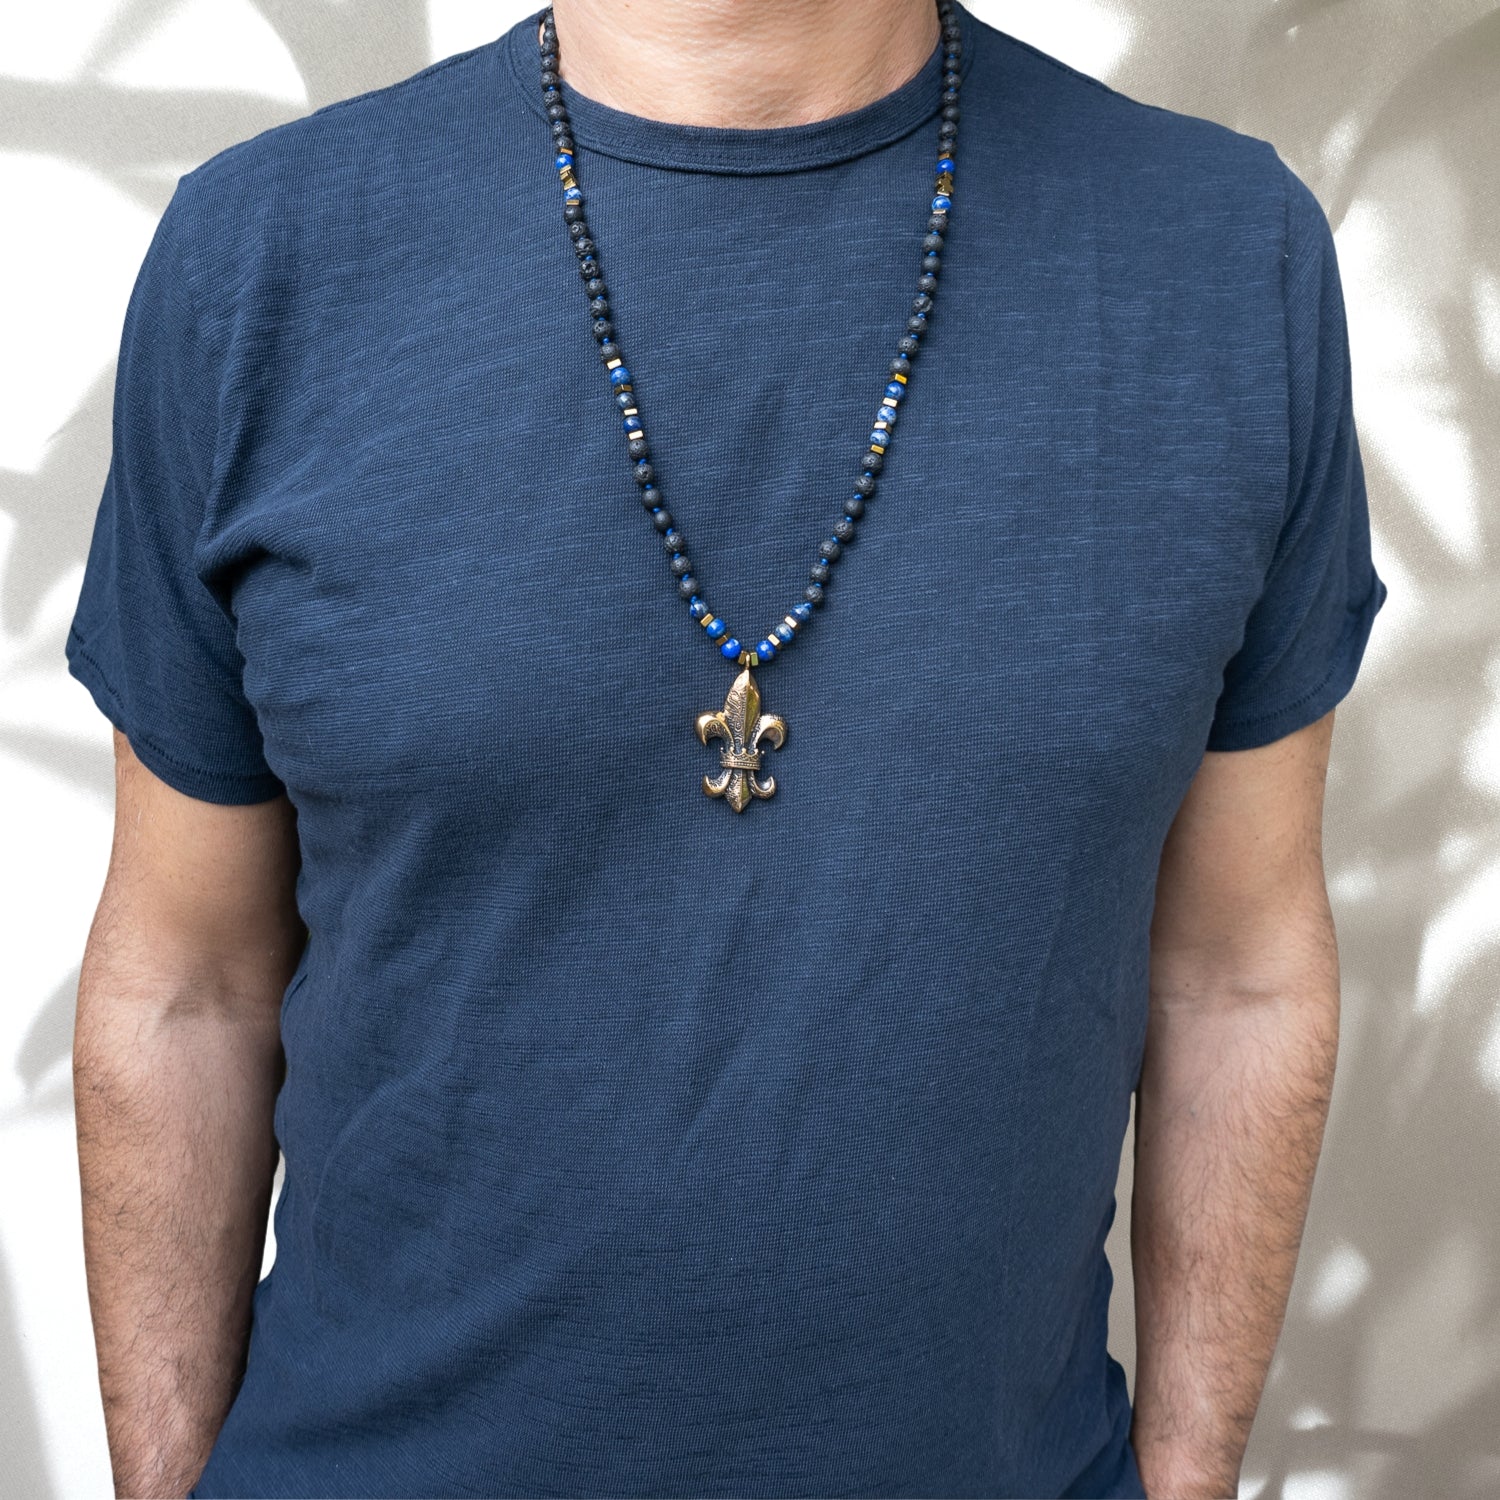 Model wearing Fleur de Lis Unique Necklace - Handmade jewelry with lava rock and lapis lazuli beads, and a bronze pendant, showcasing style, spirituality, and connection with nature.